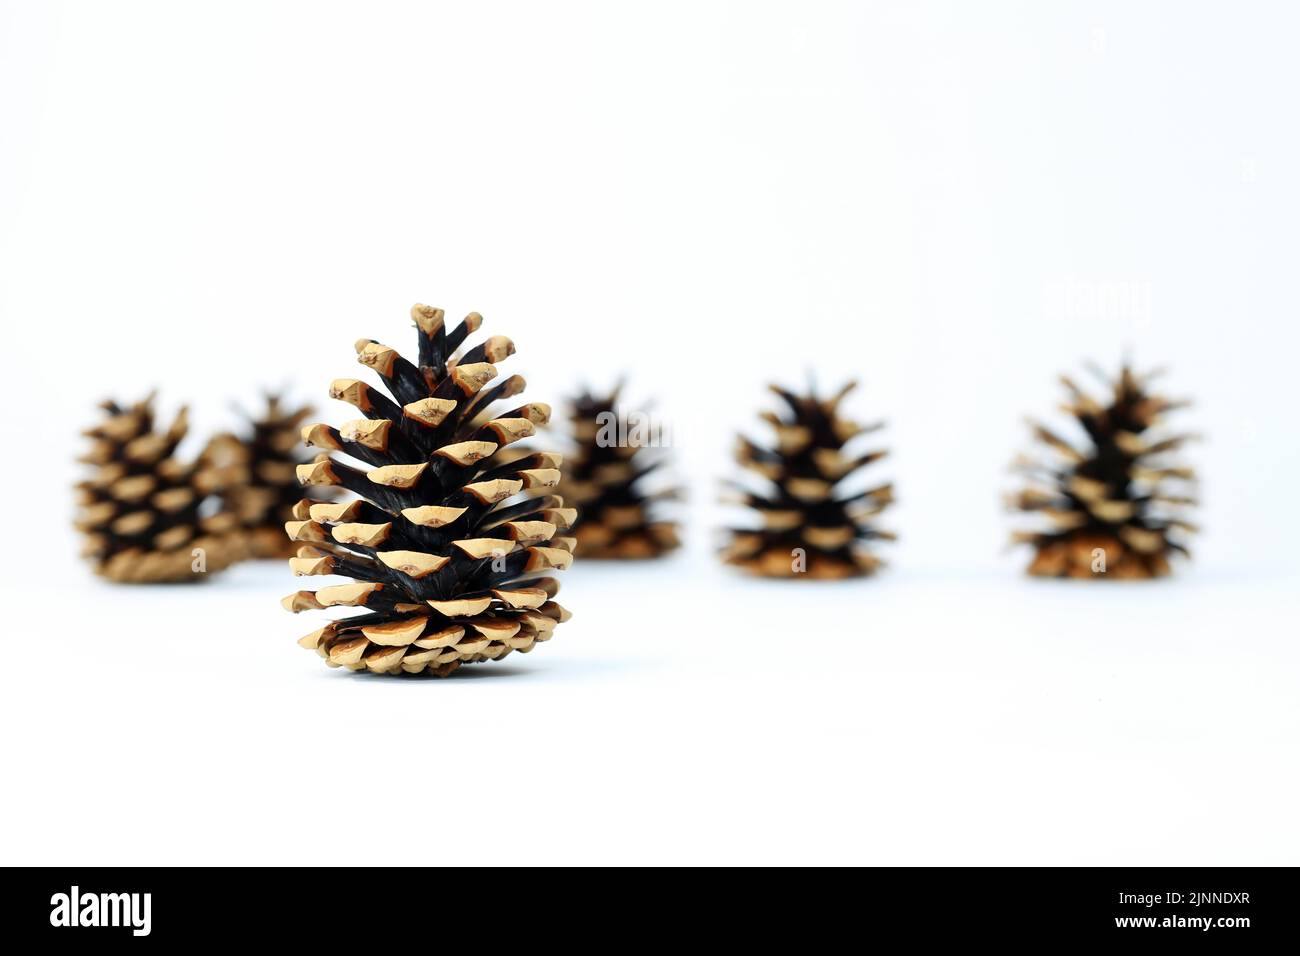 Fir cone or pine cone cropped against a white background with focus gradient Stock Photo